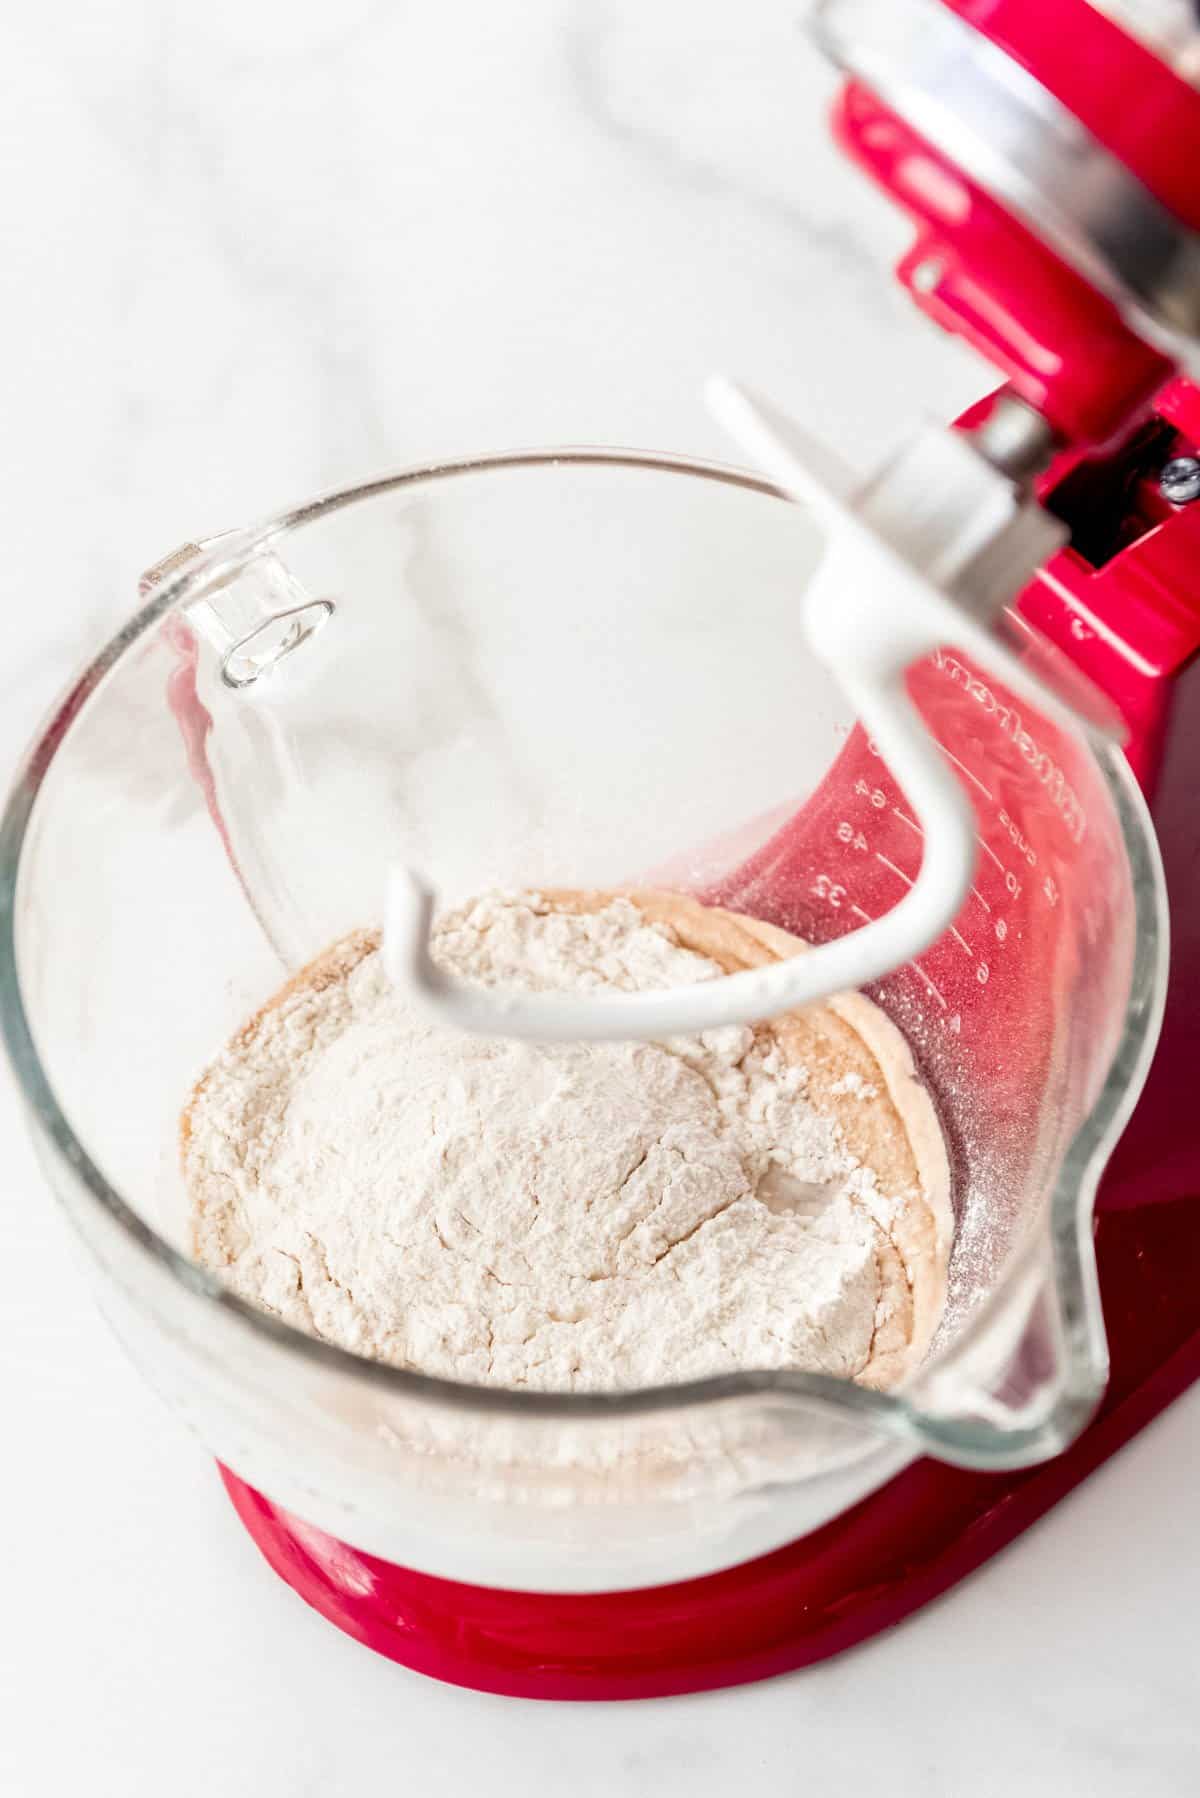 Adding flour to proofed yeast in a Kitchenaid mixer.